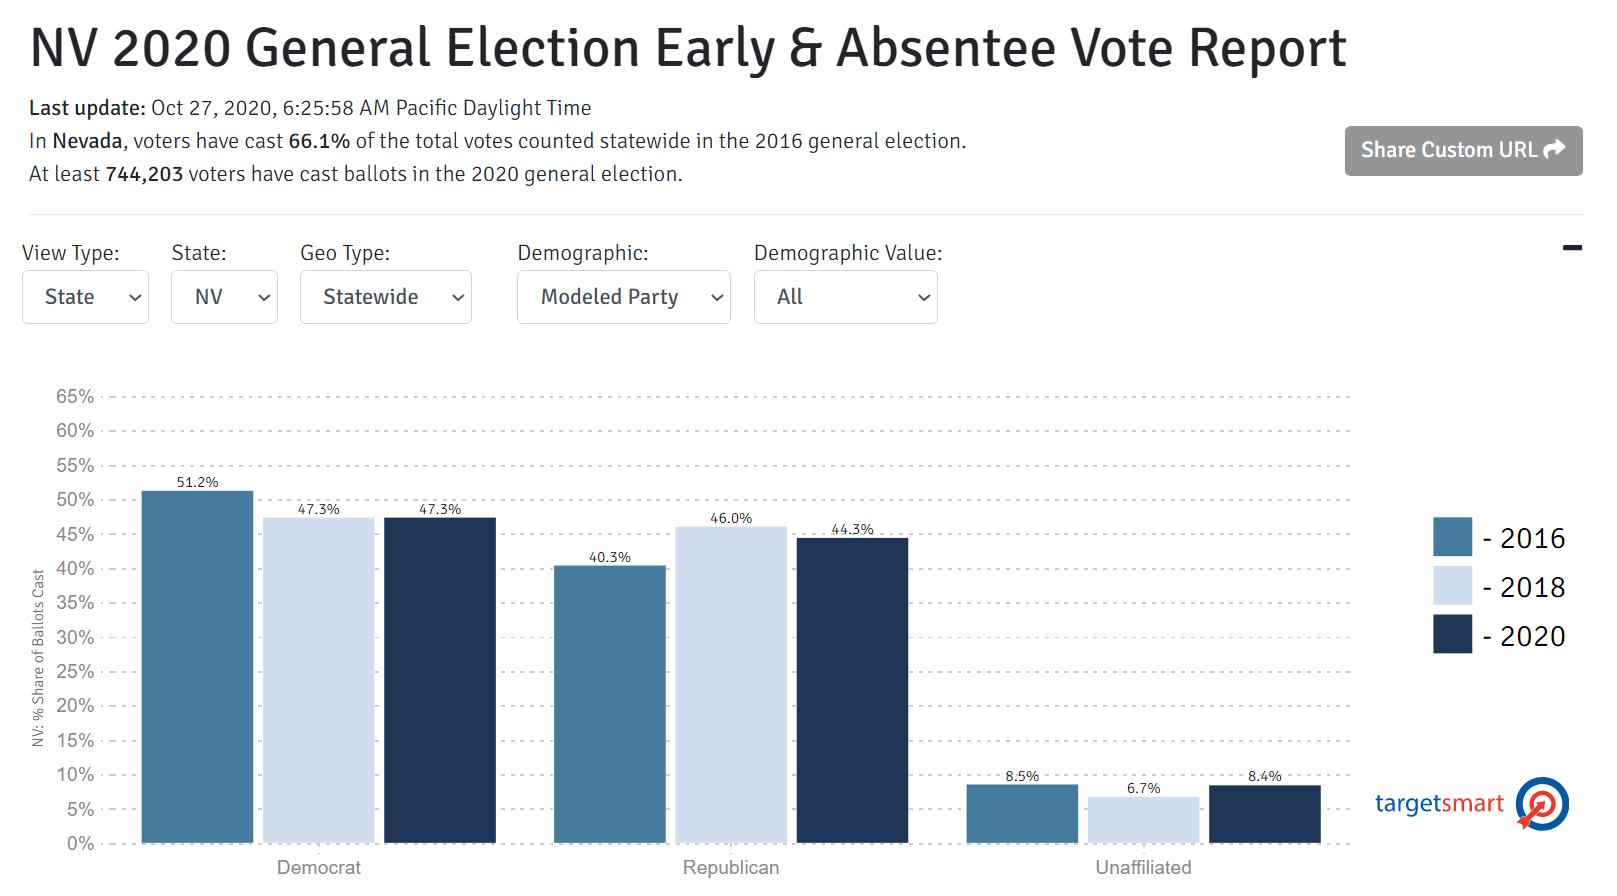 Republicans outperforming Democrats in early voting in Nevada